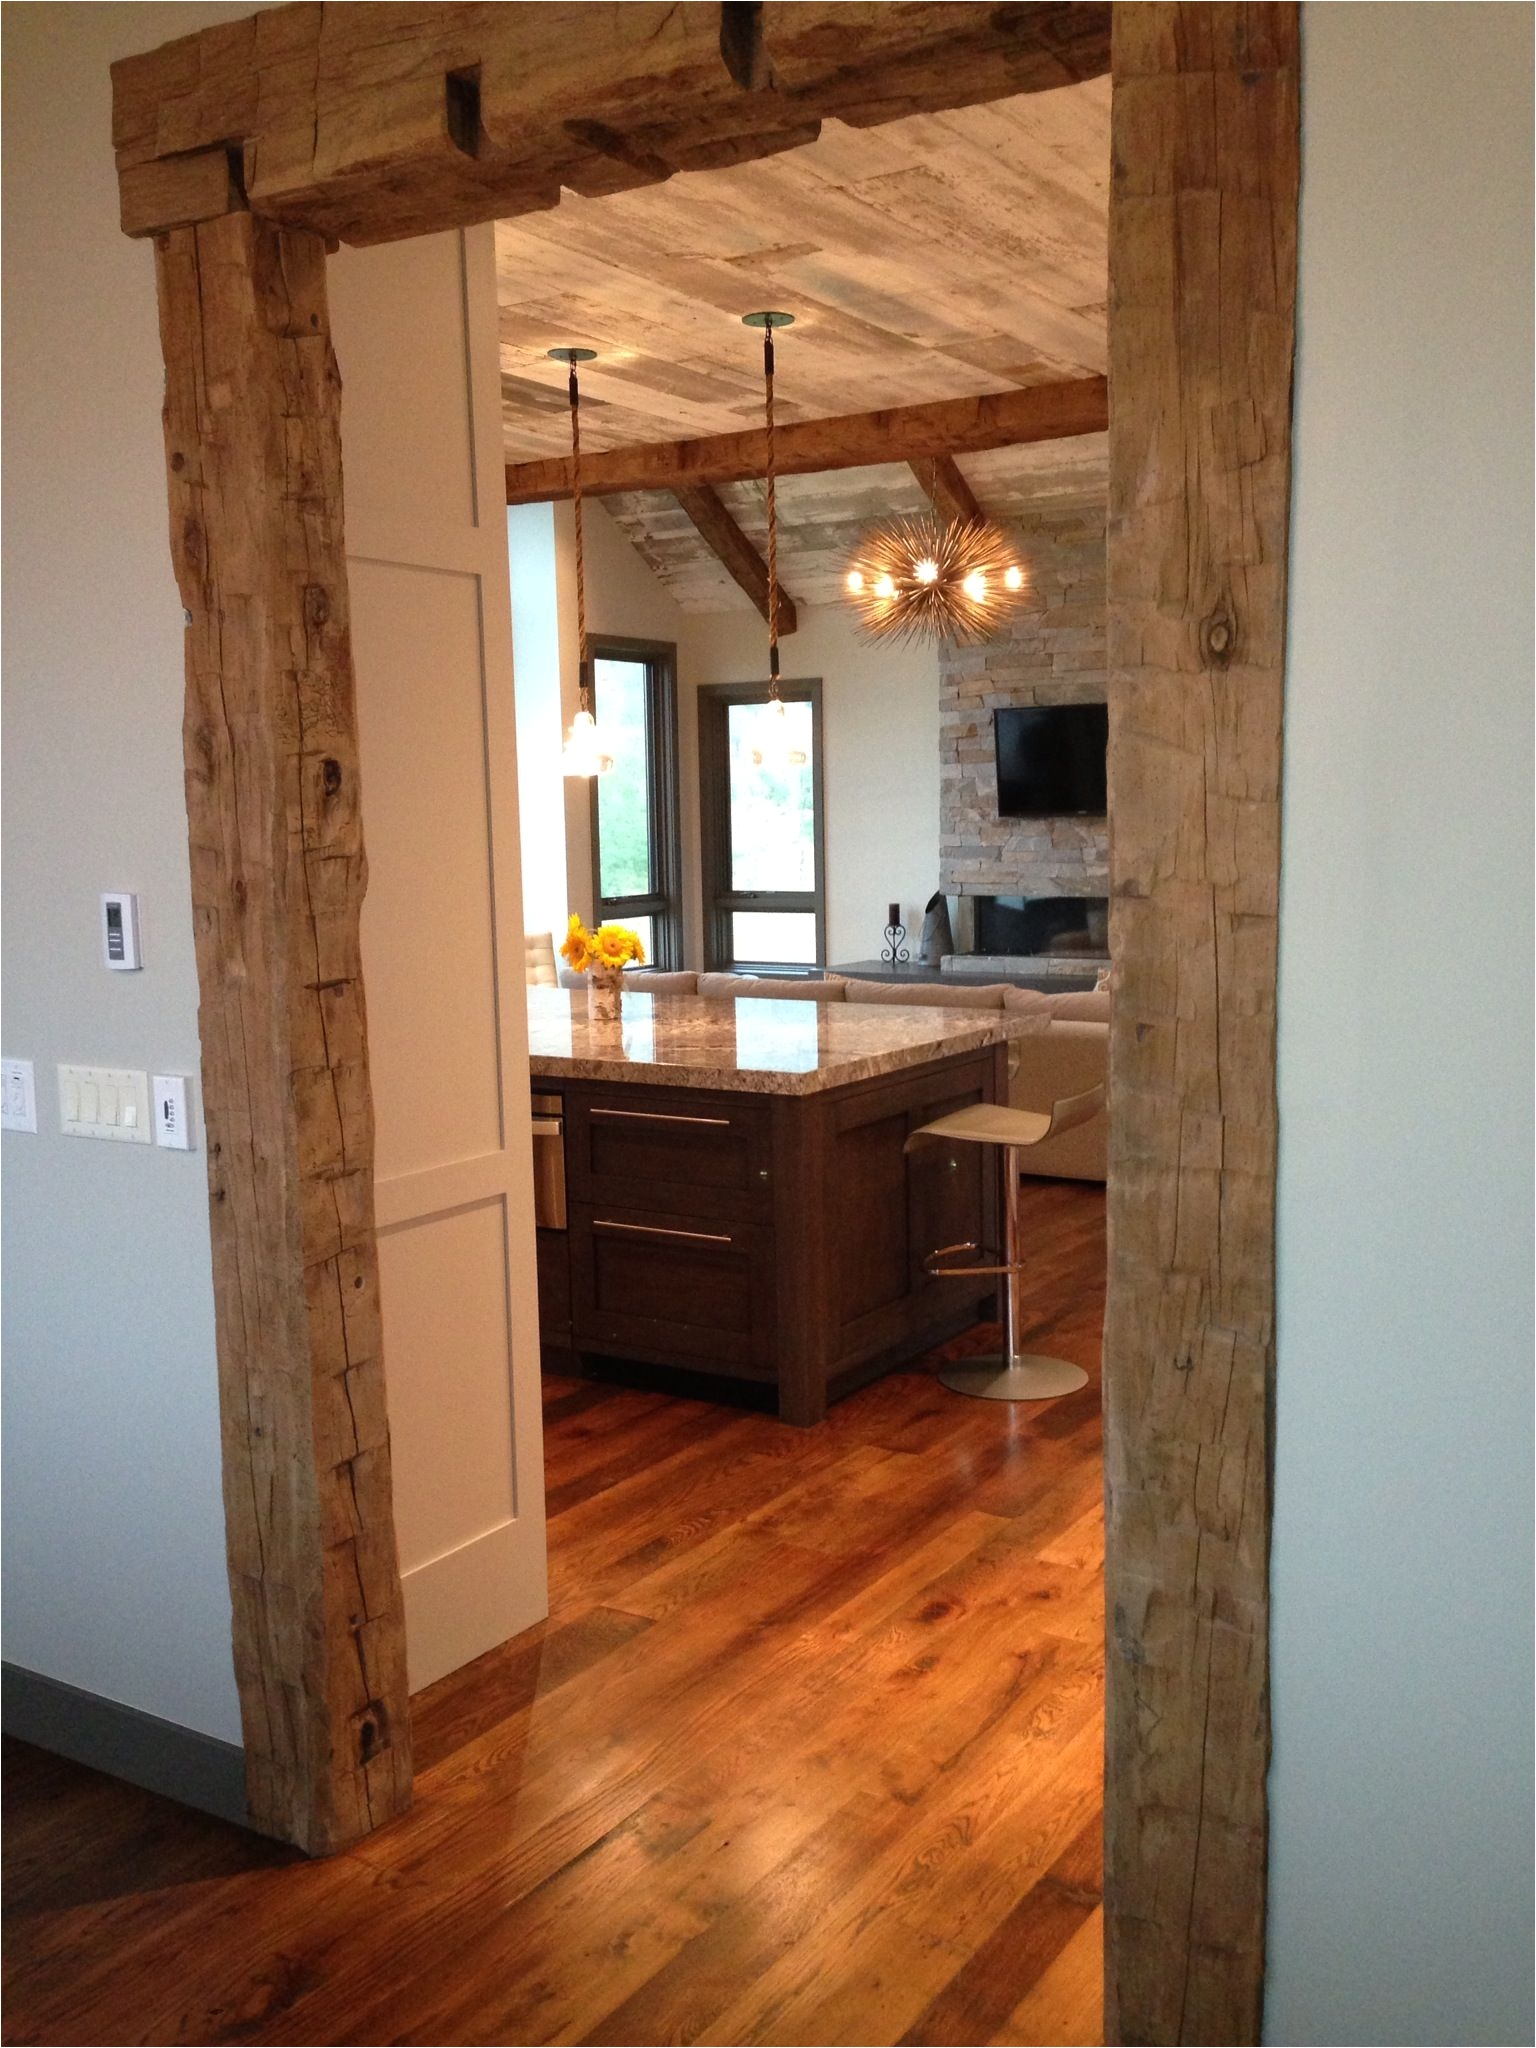 frame your doorway in hand hewn beams and create an entrance no one will forget